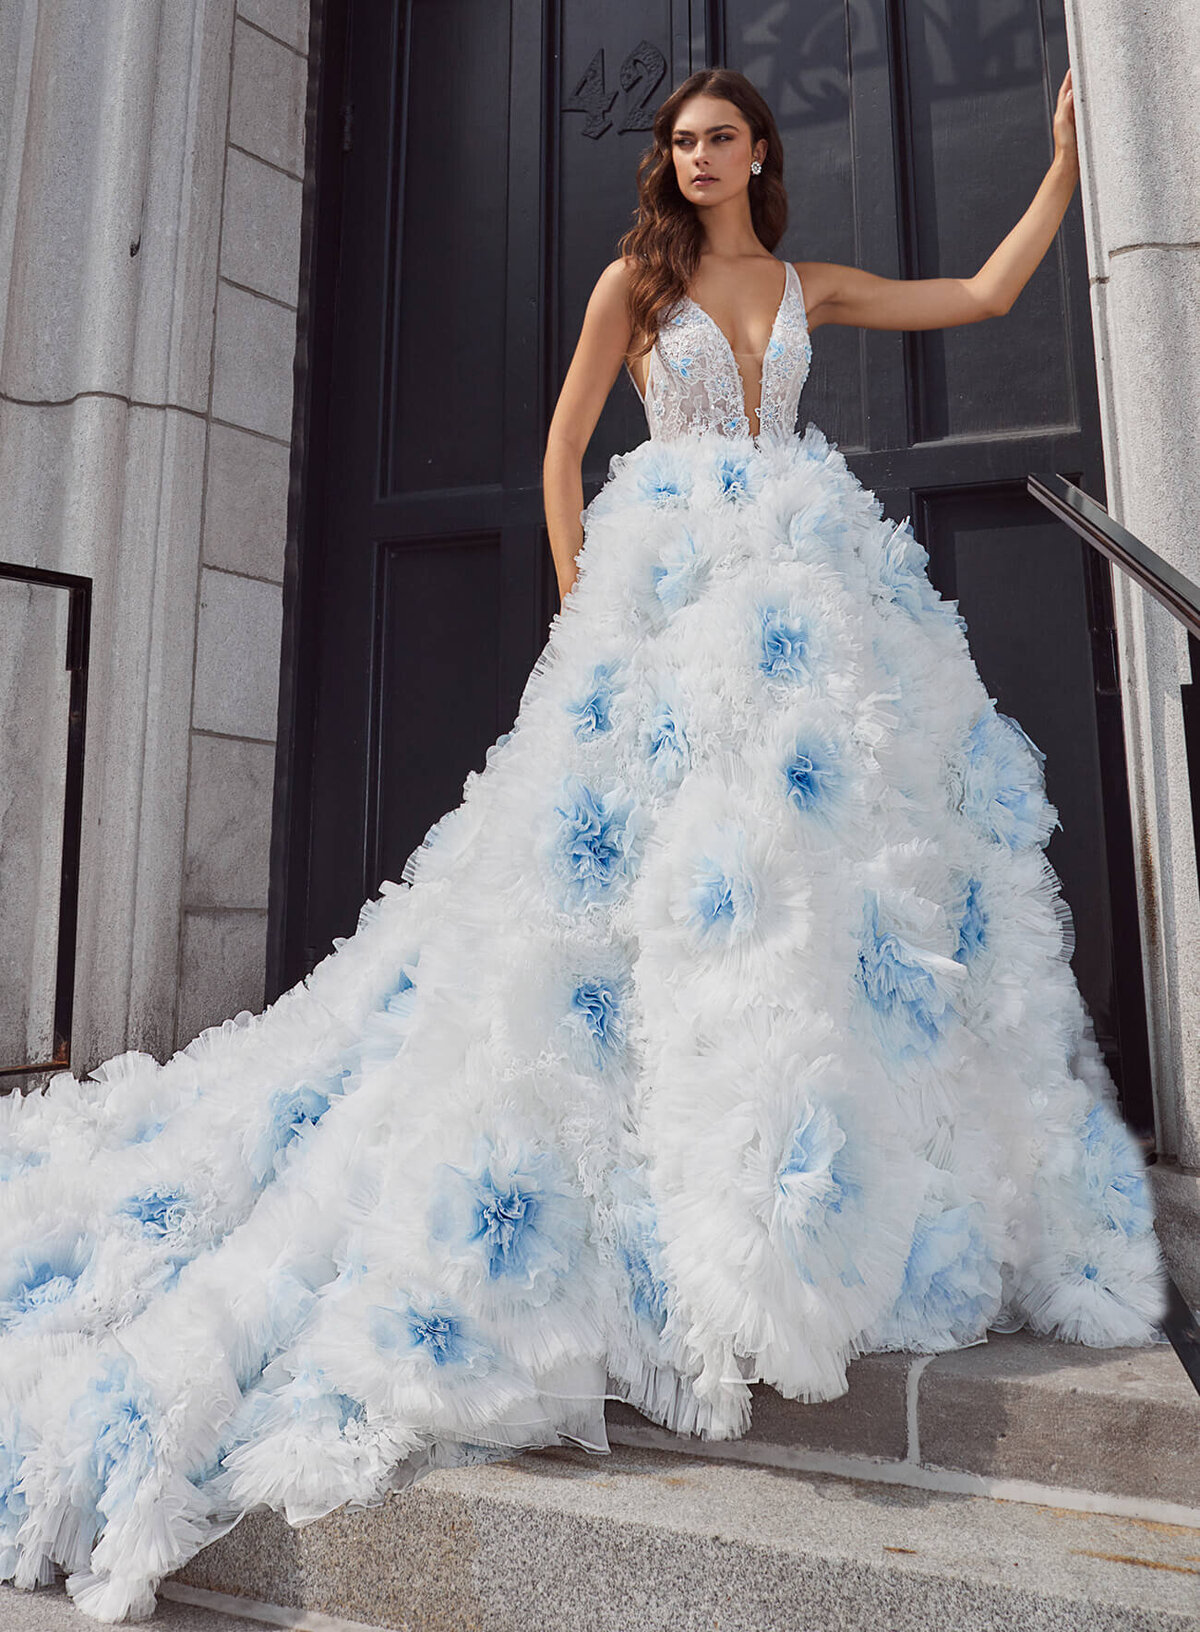 uploads_1700064737846-124123-Reigh-Colorful-Blue-Ball-Gown-Wedding-Dress-with-V-Neckline1